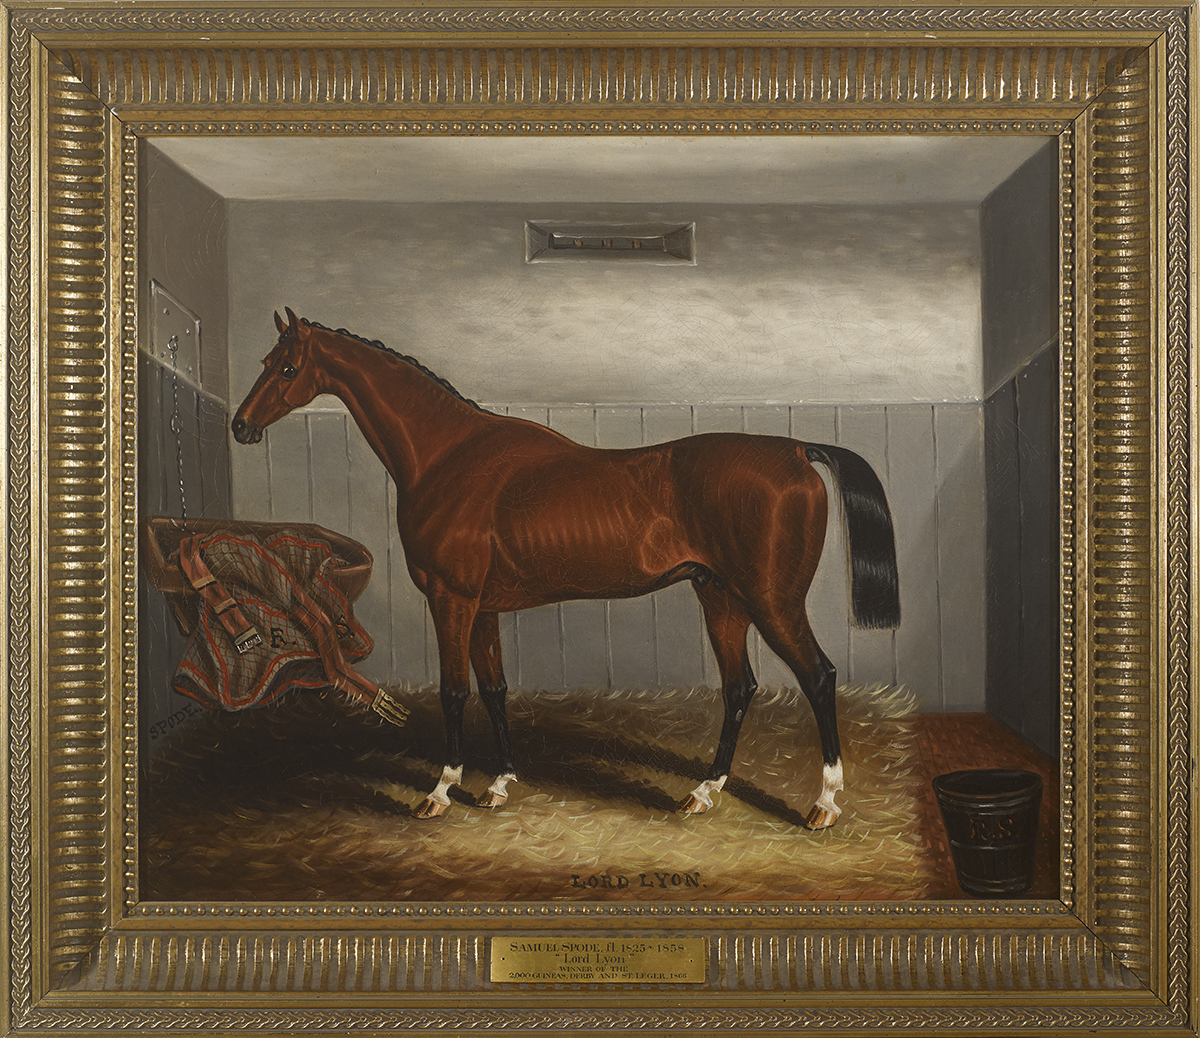 Samuel Spode (fl.1825-1858) LORD LYON, A BAY COLT IN A STABLE oil on canvas signed lower left; - Image 2 of 2